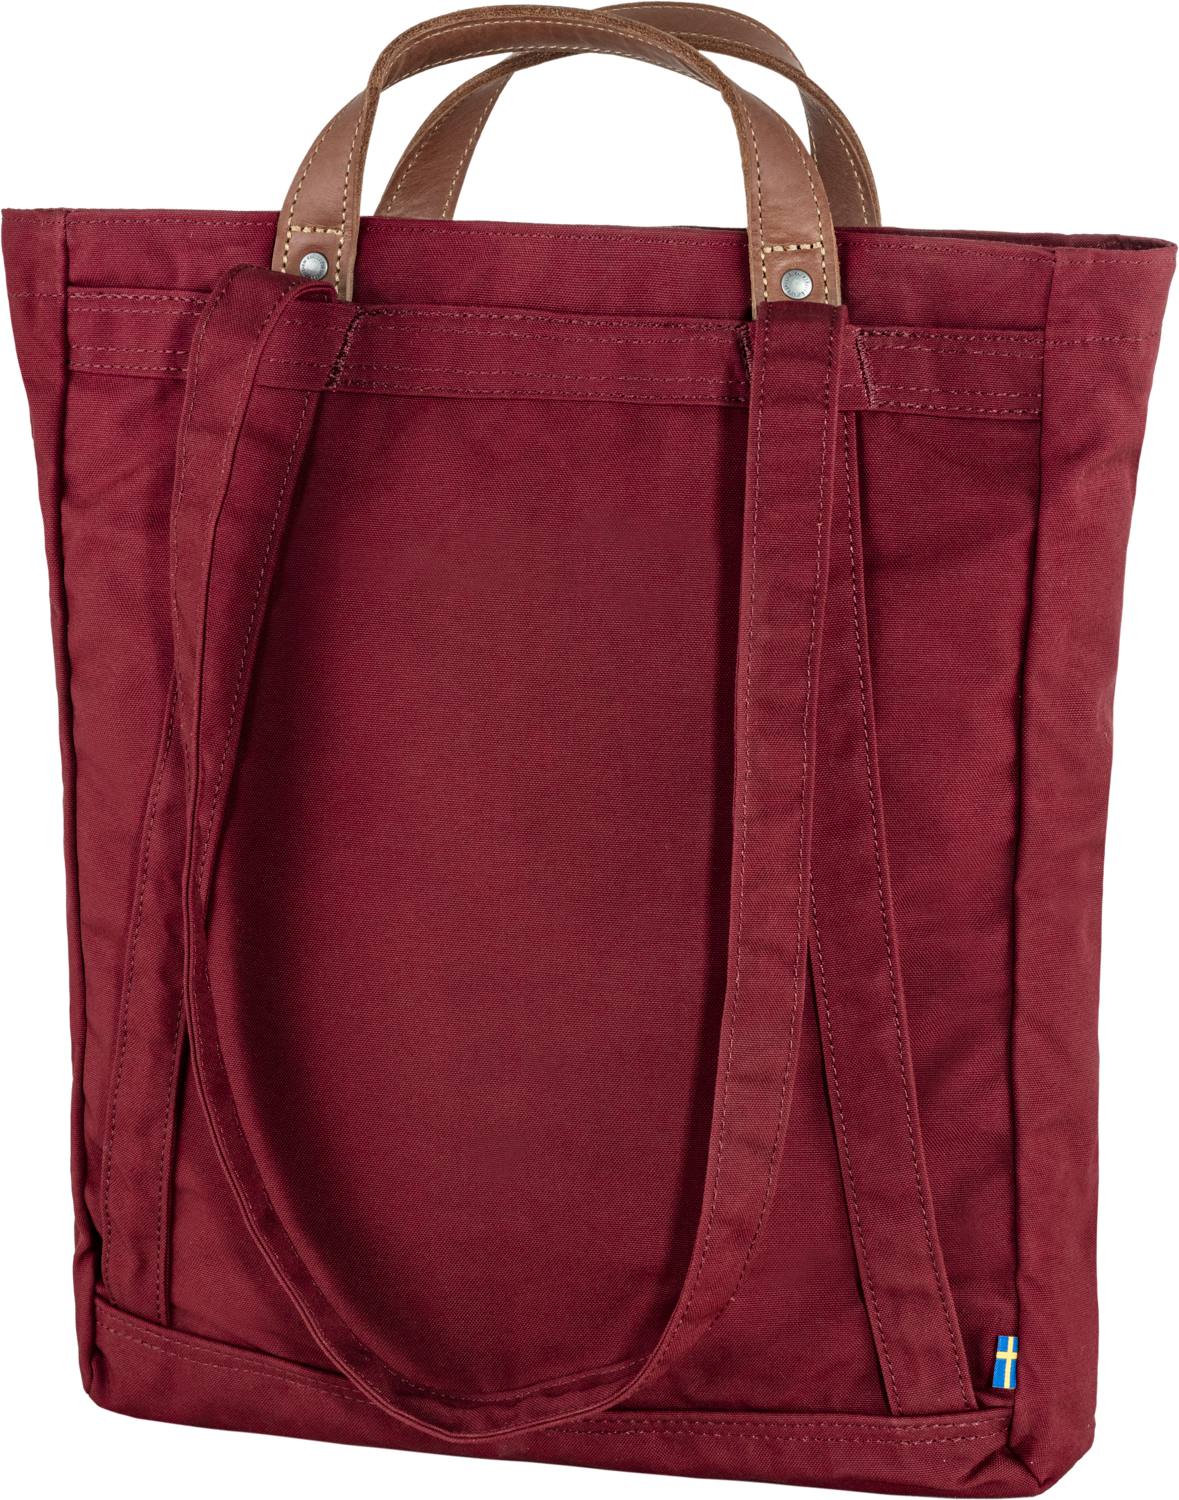 Totepack No. 1 Bordeaux (Red)